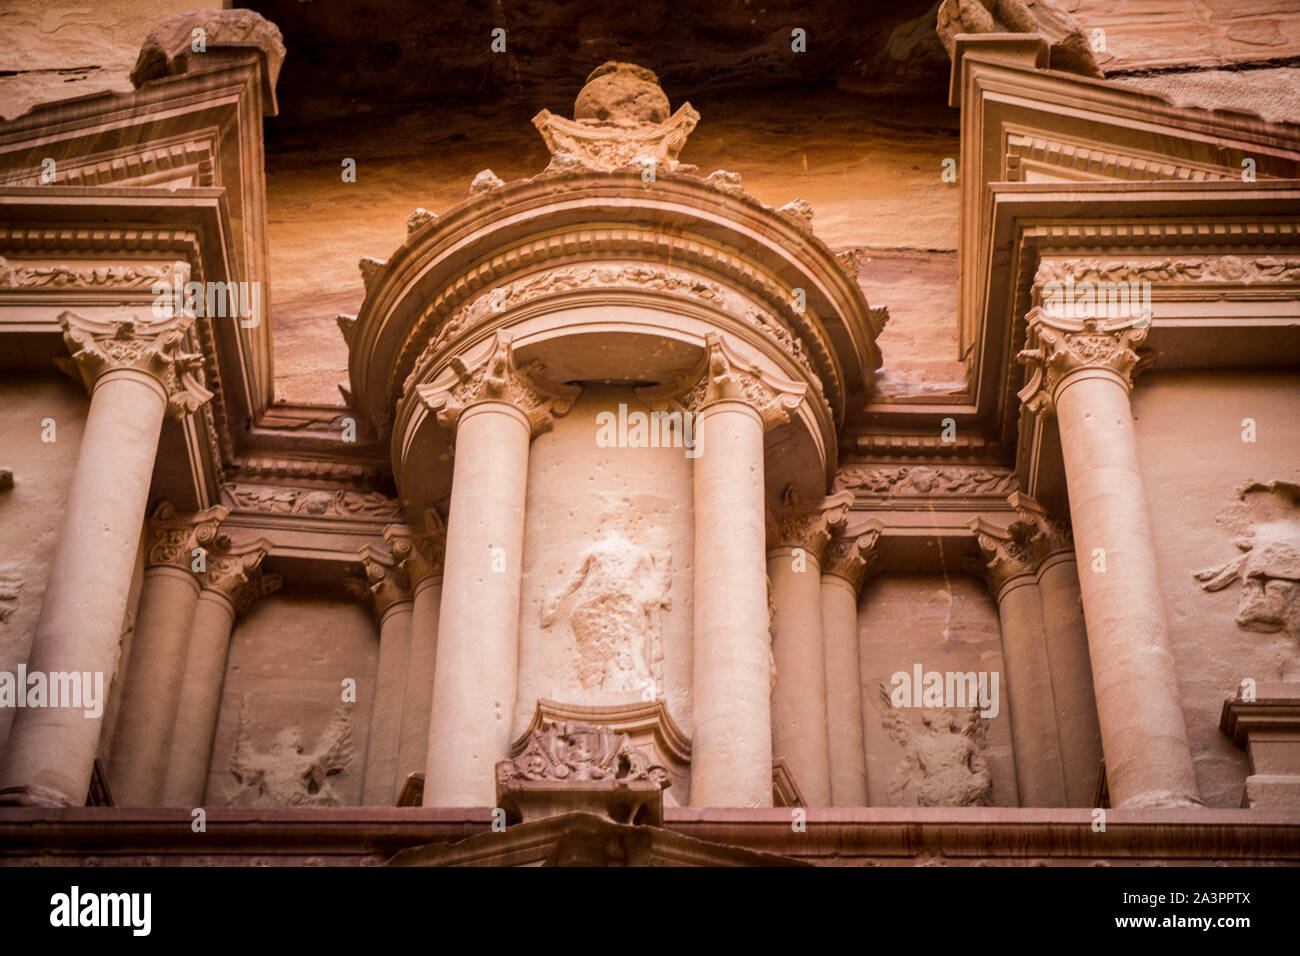 The iconic carved stone facade of The Treasury at Petra, Jordan Stock Photo